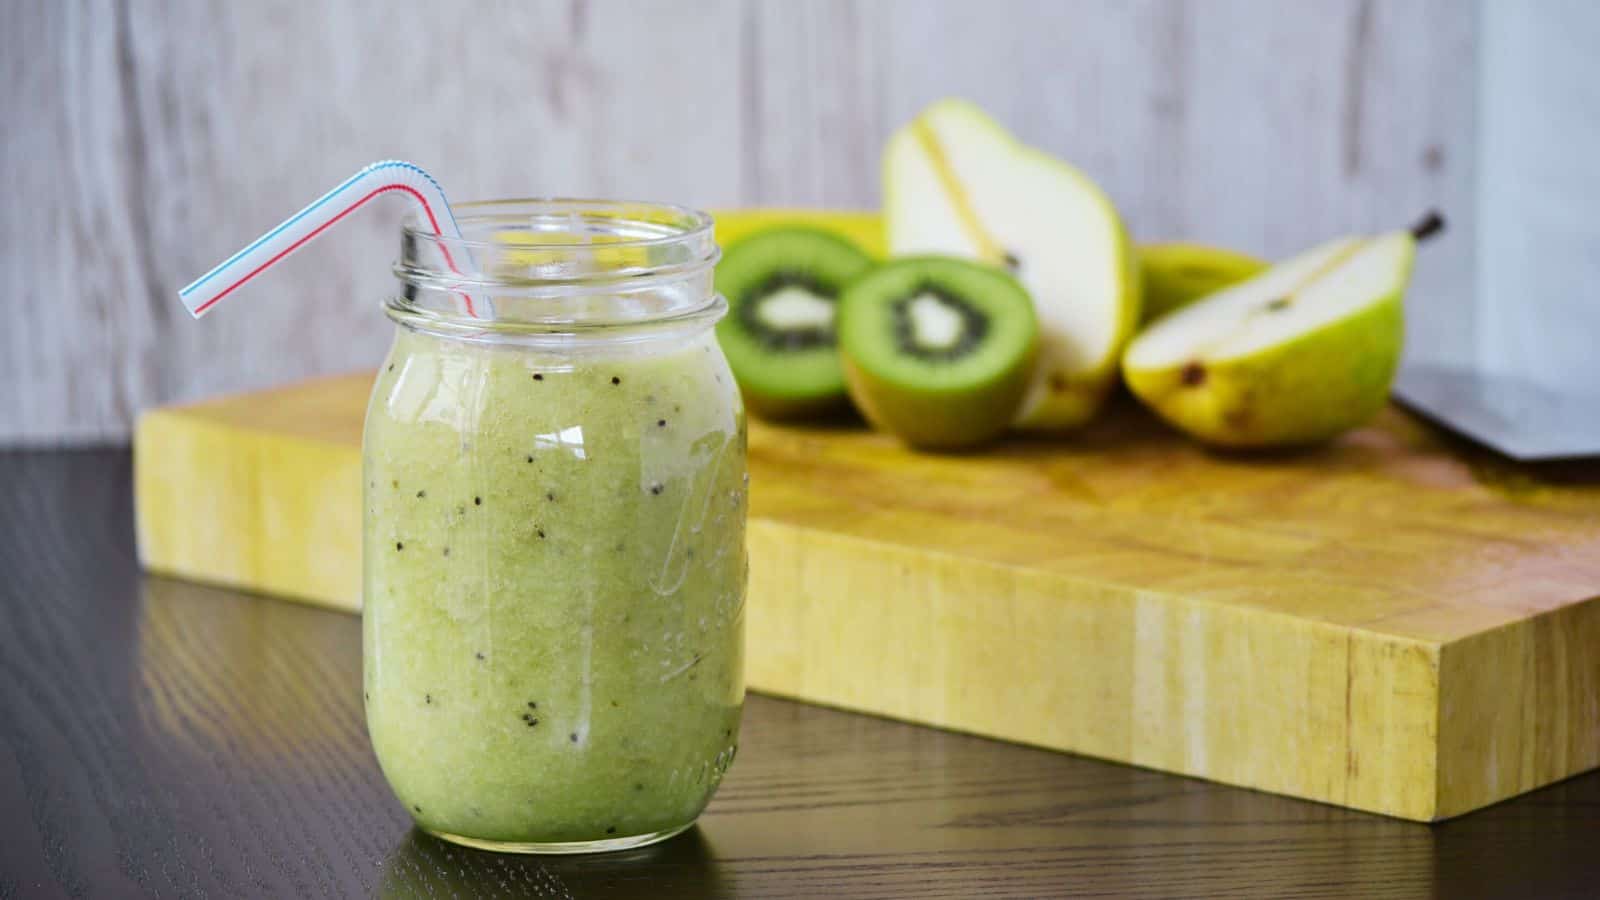 A kiwi pear green smoothie in a glass with a kiwi on the rim and a green straw.